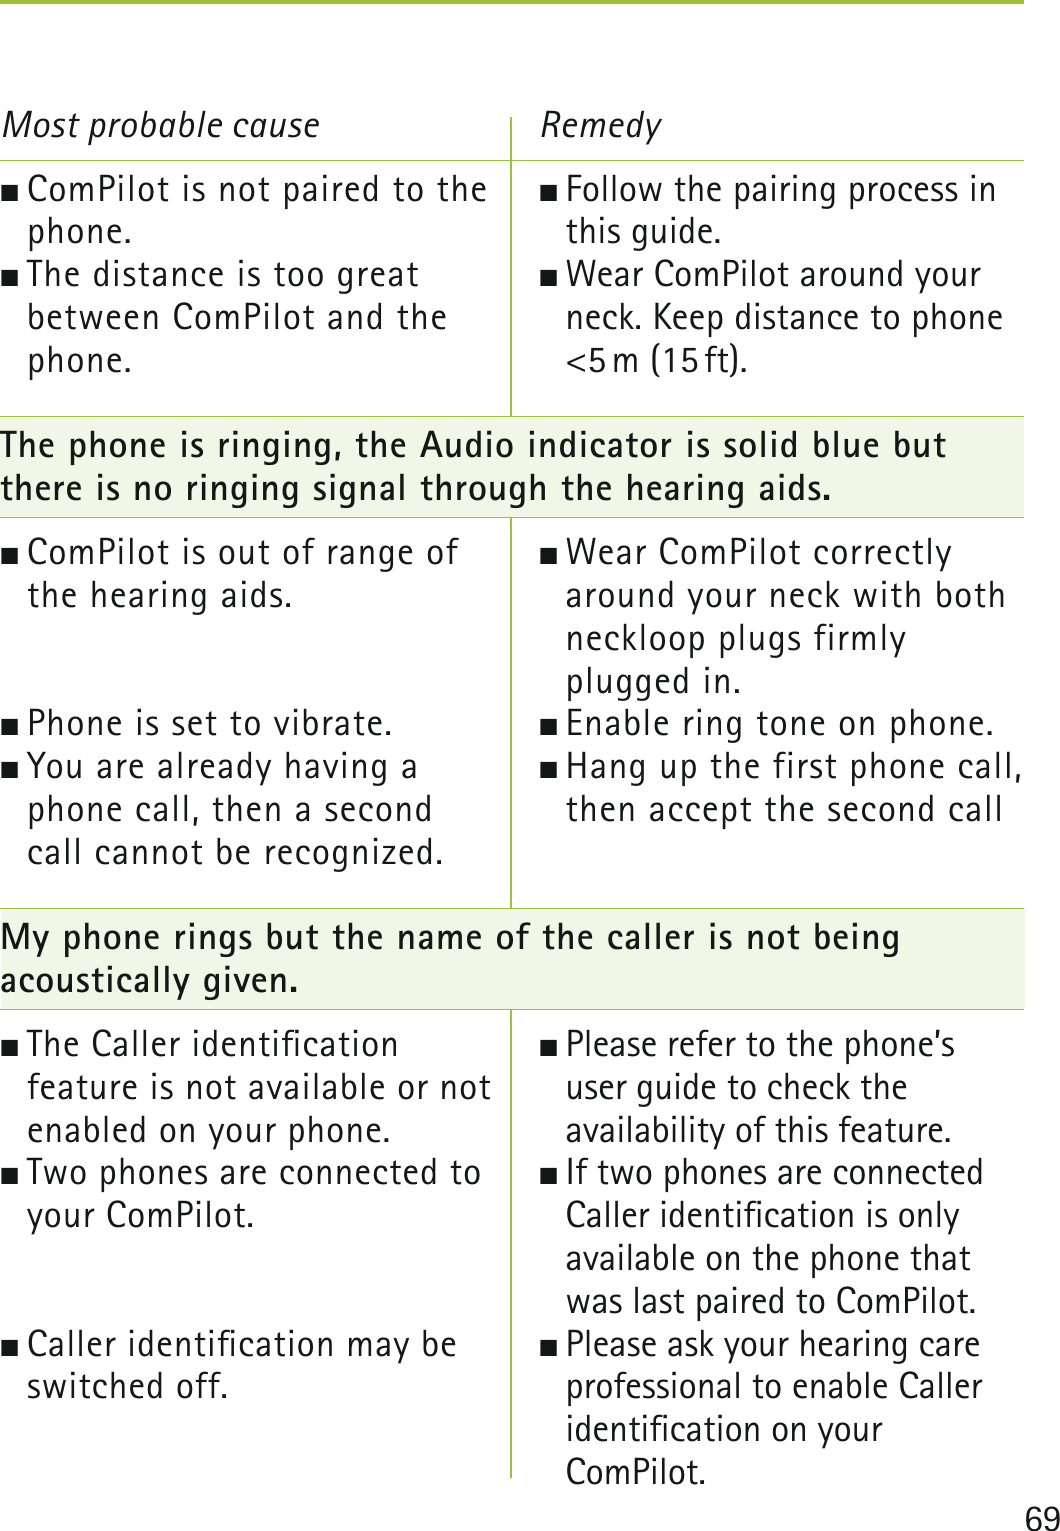 69  ComPilot is not paired to the phone. The distance is too great  between ComPilot and the phone.The phone is ringing, the Audio indicator is solid blue but  there is no ringing signal through the hearing aids. ComPilot is out of range of  the hearing aids. Phone is set to vibrate. You are already having a  phone call, then a second  call cannot be recognized.My phone rings but the name of the caller is not being  acoustically given. The Caller identiﬁcation  feature is not available or not enabled on your phone. Two phones are connected to your ComPilot. Caller identiﬁcation may be switched off.Most probable cause Follow the pairing process in this guide. Wear ComPilot around your neck. Keep distance to phone &lt;5 m  (15 ft). Wear ComPilot correctly around your neck with both neckloop plugs firmly plugged in. Enable ring tone on phone. Hang up the first phone call, then accept the second call  Please refer to the phone’s user guide to check the  availability of this feature. If two phones are connected Caller identiﬁcation is only available on the phone that was last paired to ComPilot. Please ask your hearing care professional to enable Caller identiﬁcation on your  ComPilot.Remedy